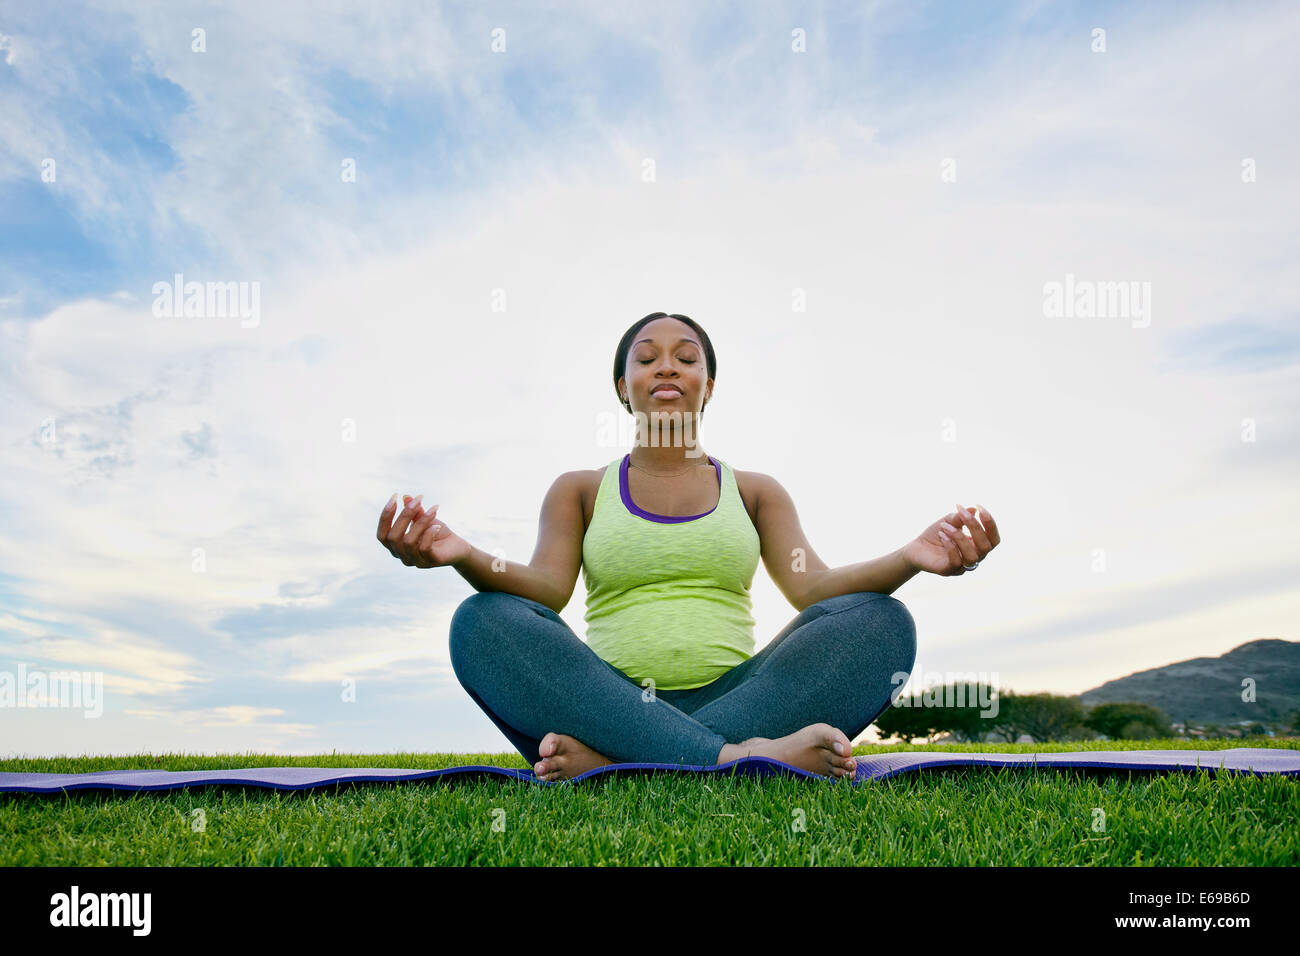 Pregnant woman meditating in park Stock Photo